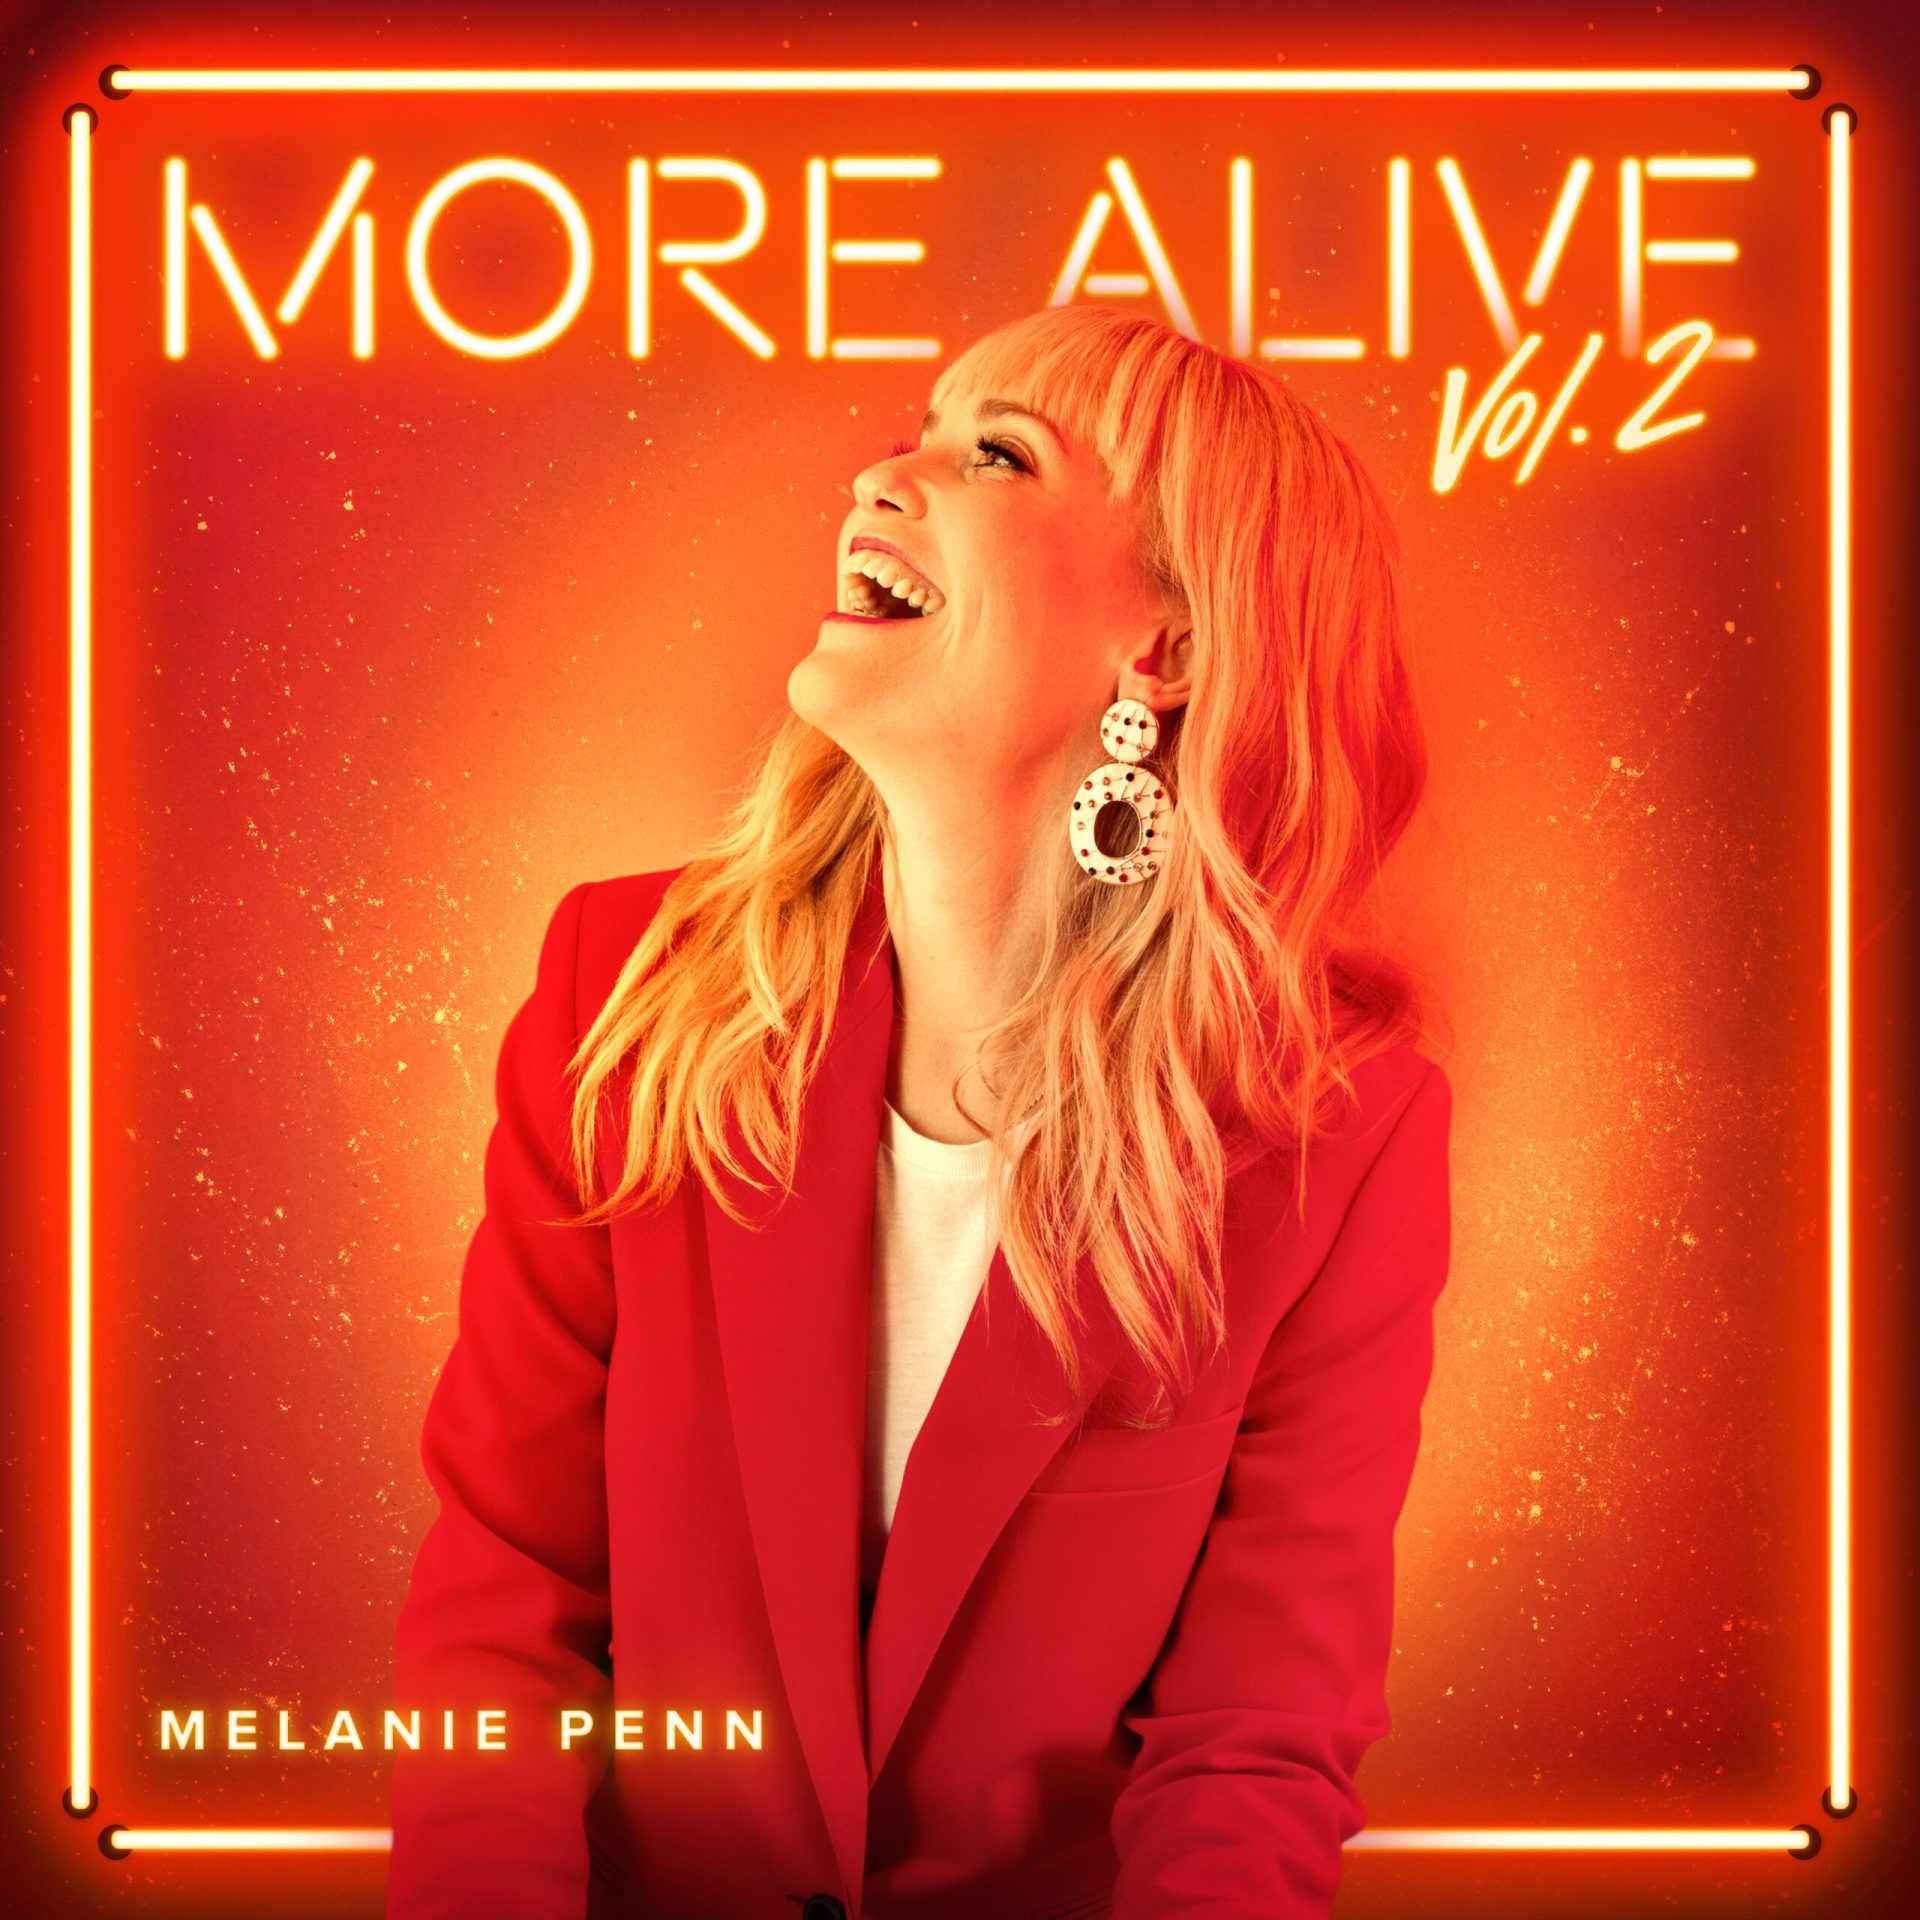 New Album “More Alive Vol 2” From Melanie Penn, Yours Truly, News, September 26, 2023